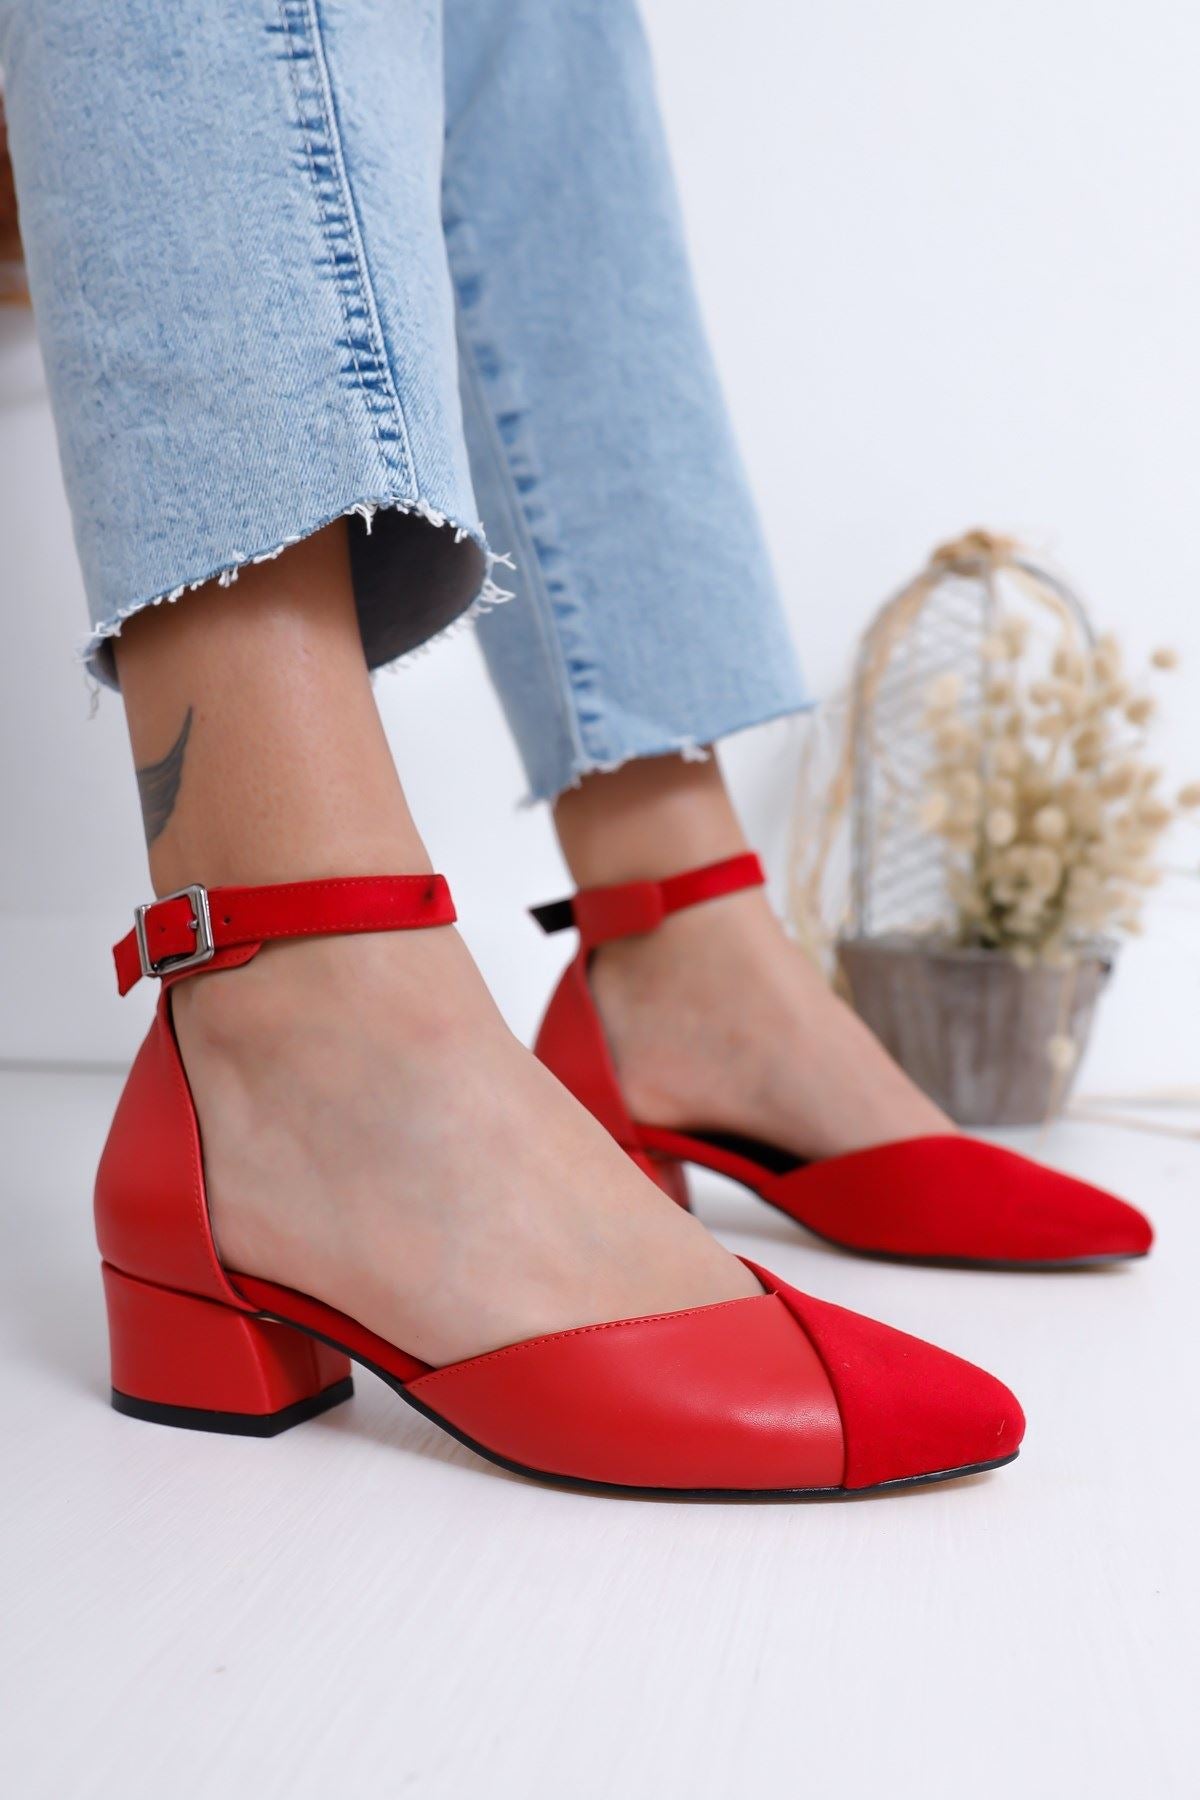 Women's Holly Heels Red Skin-Suede Shoes - STREET MODE ™